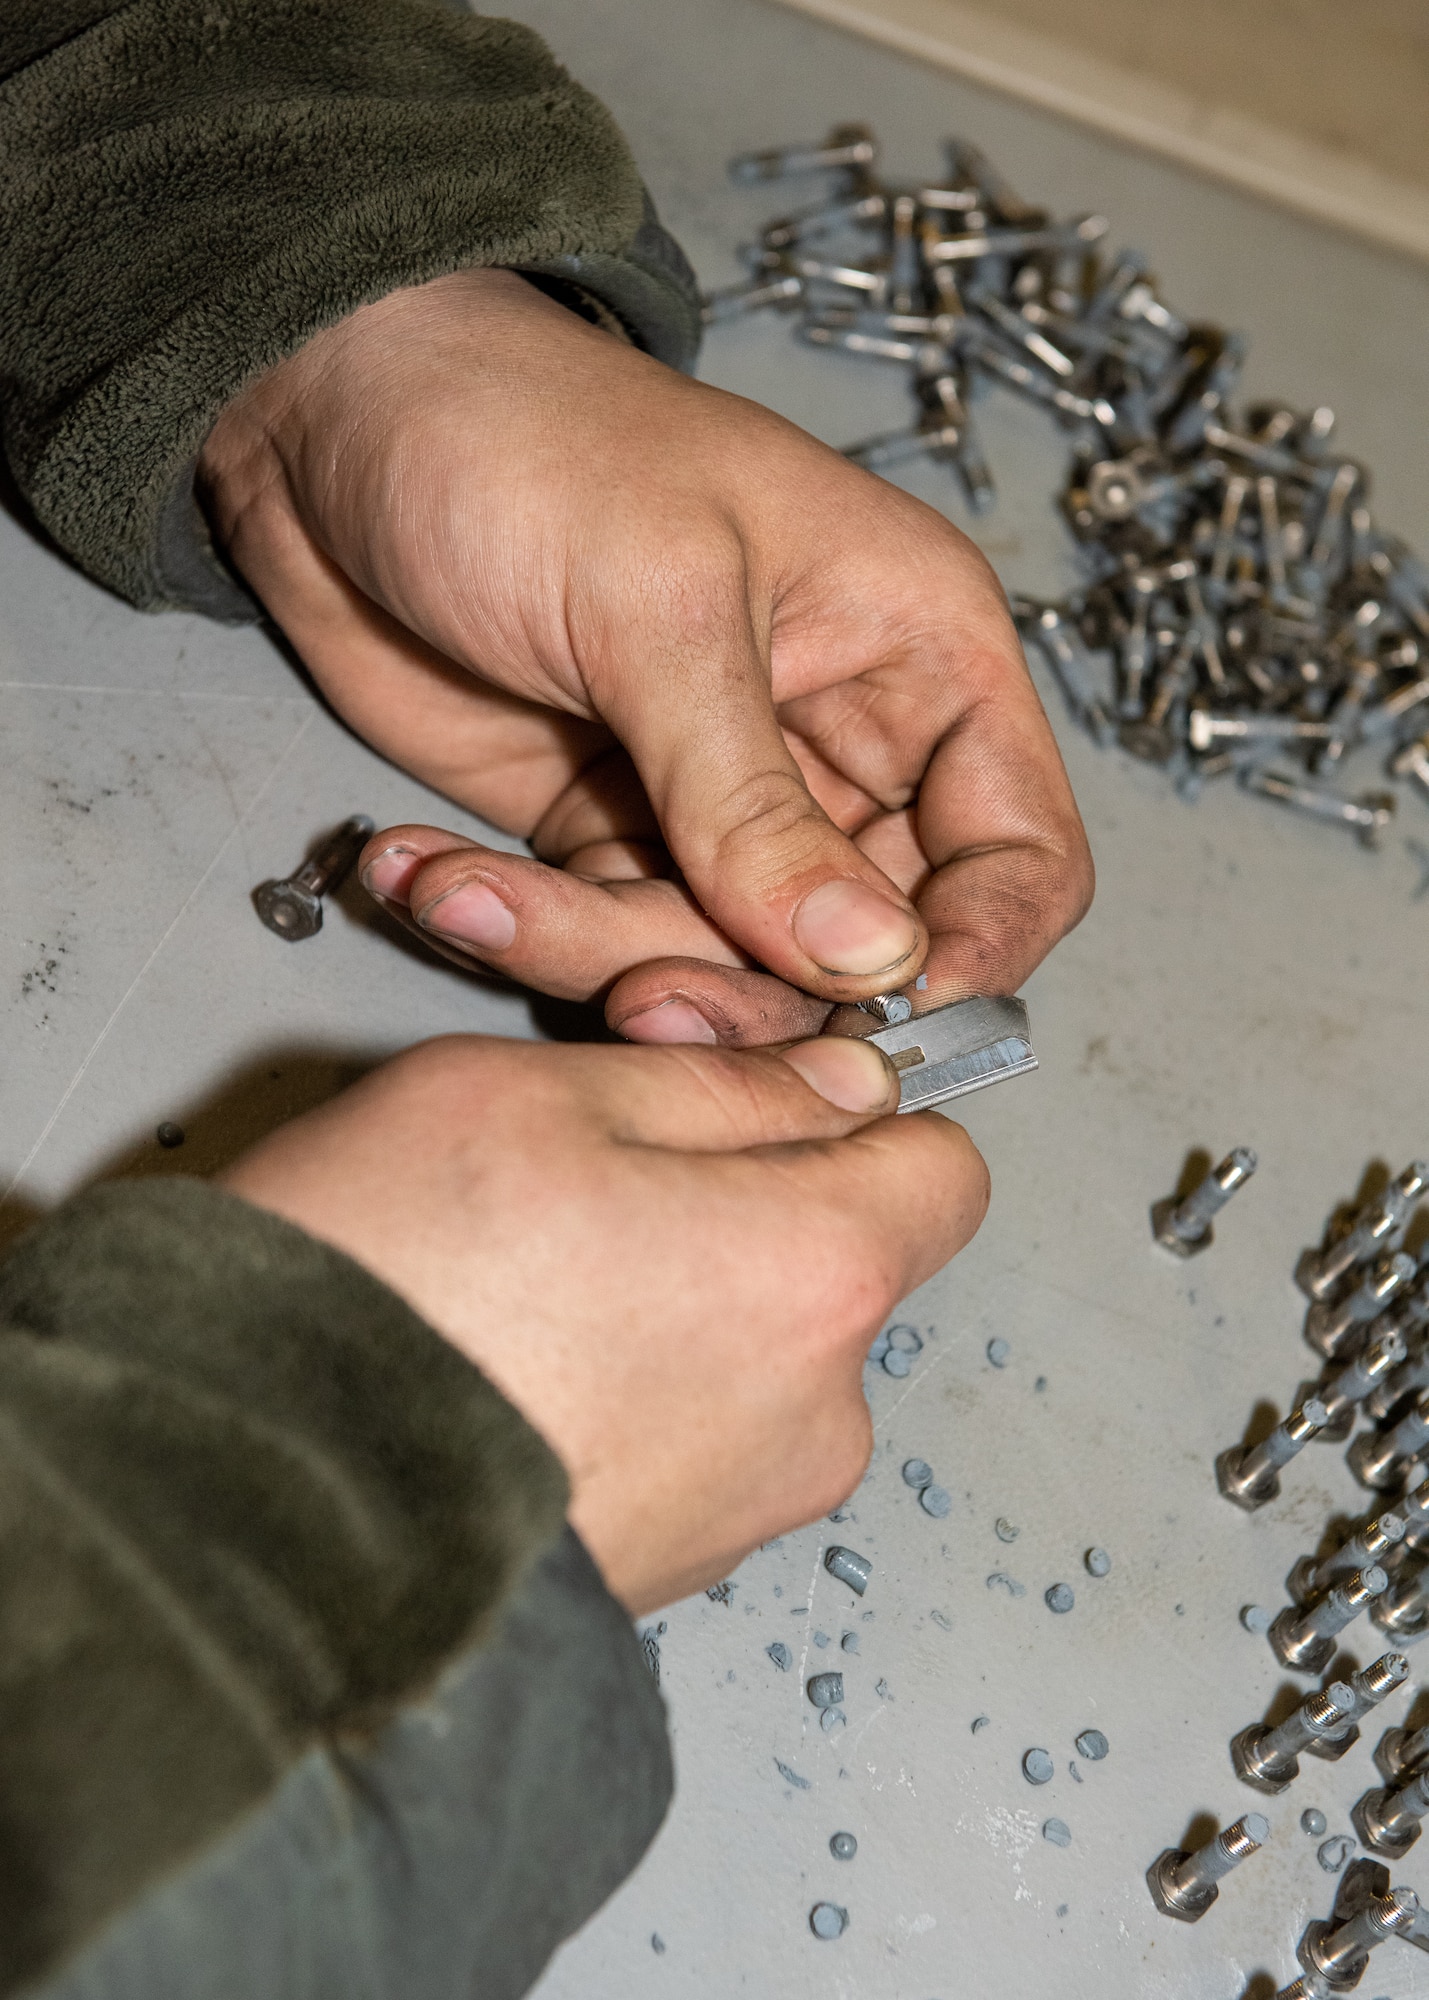 Airmen prepares fasteners for installation during the rebuild of an F-22 aircraft.